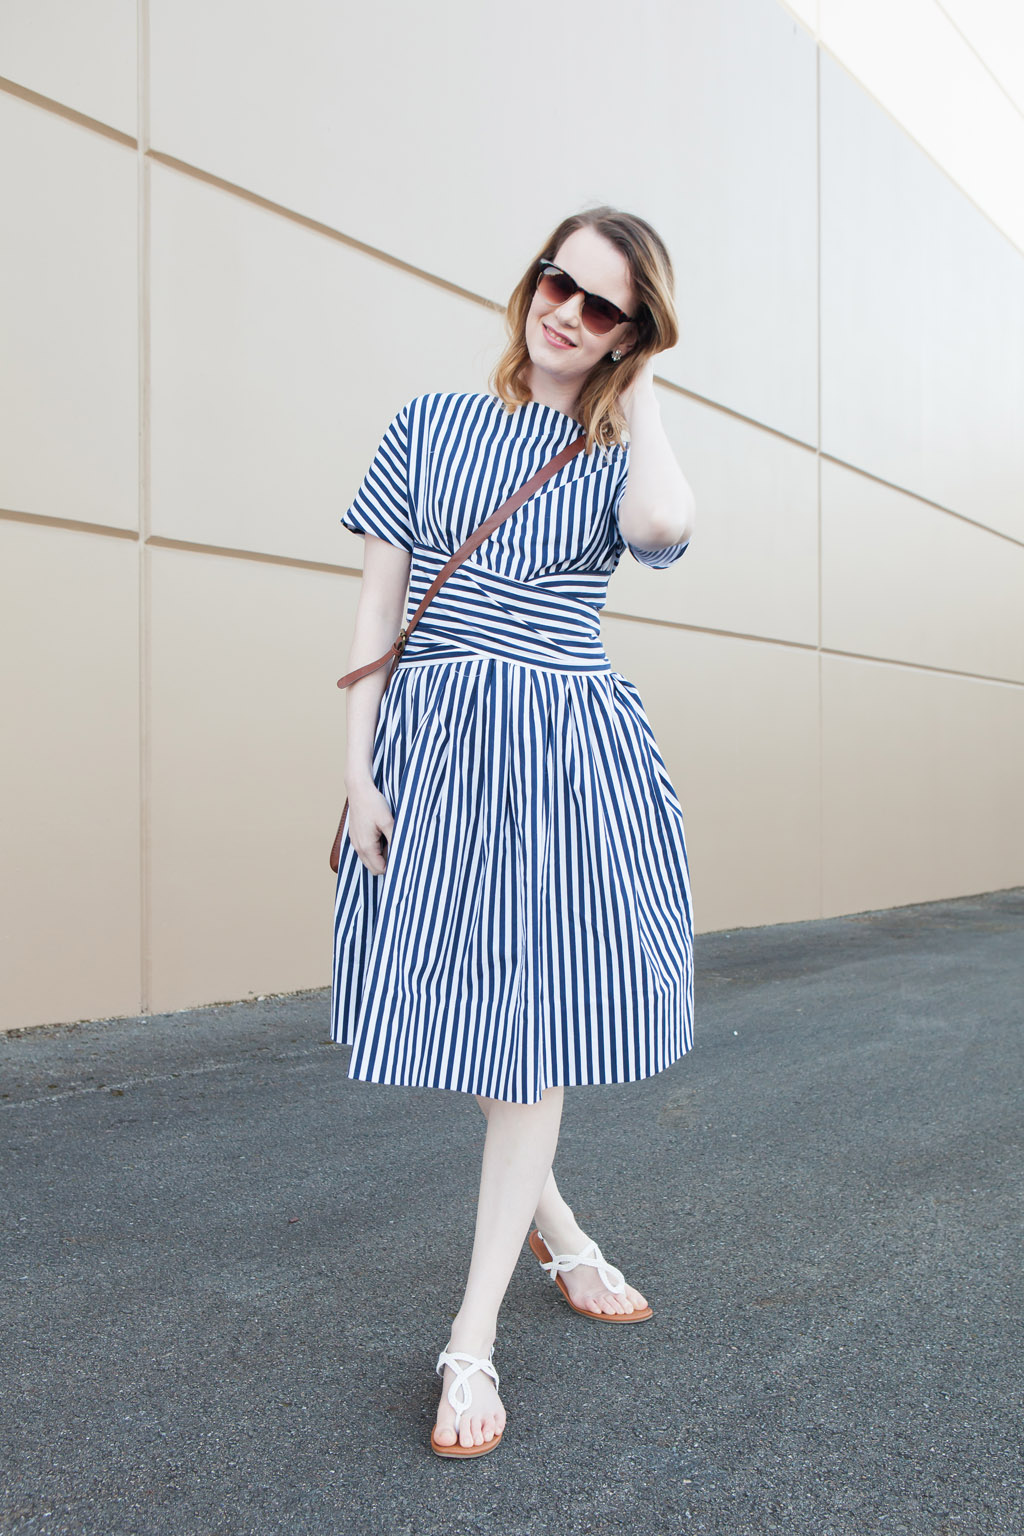 Sew Very Lovely: A Do it Yourself Summer Dress: Navy + White Nautical ...